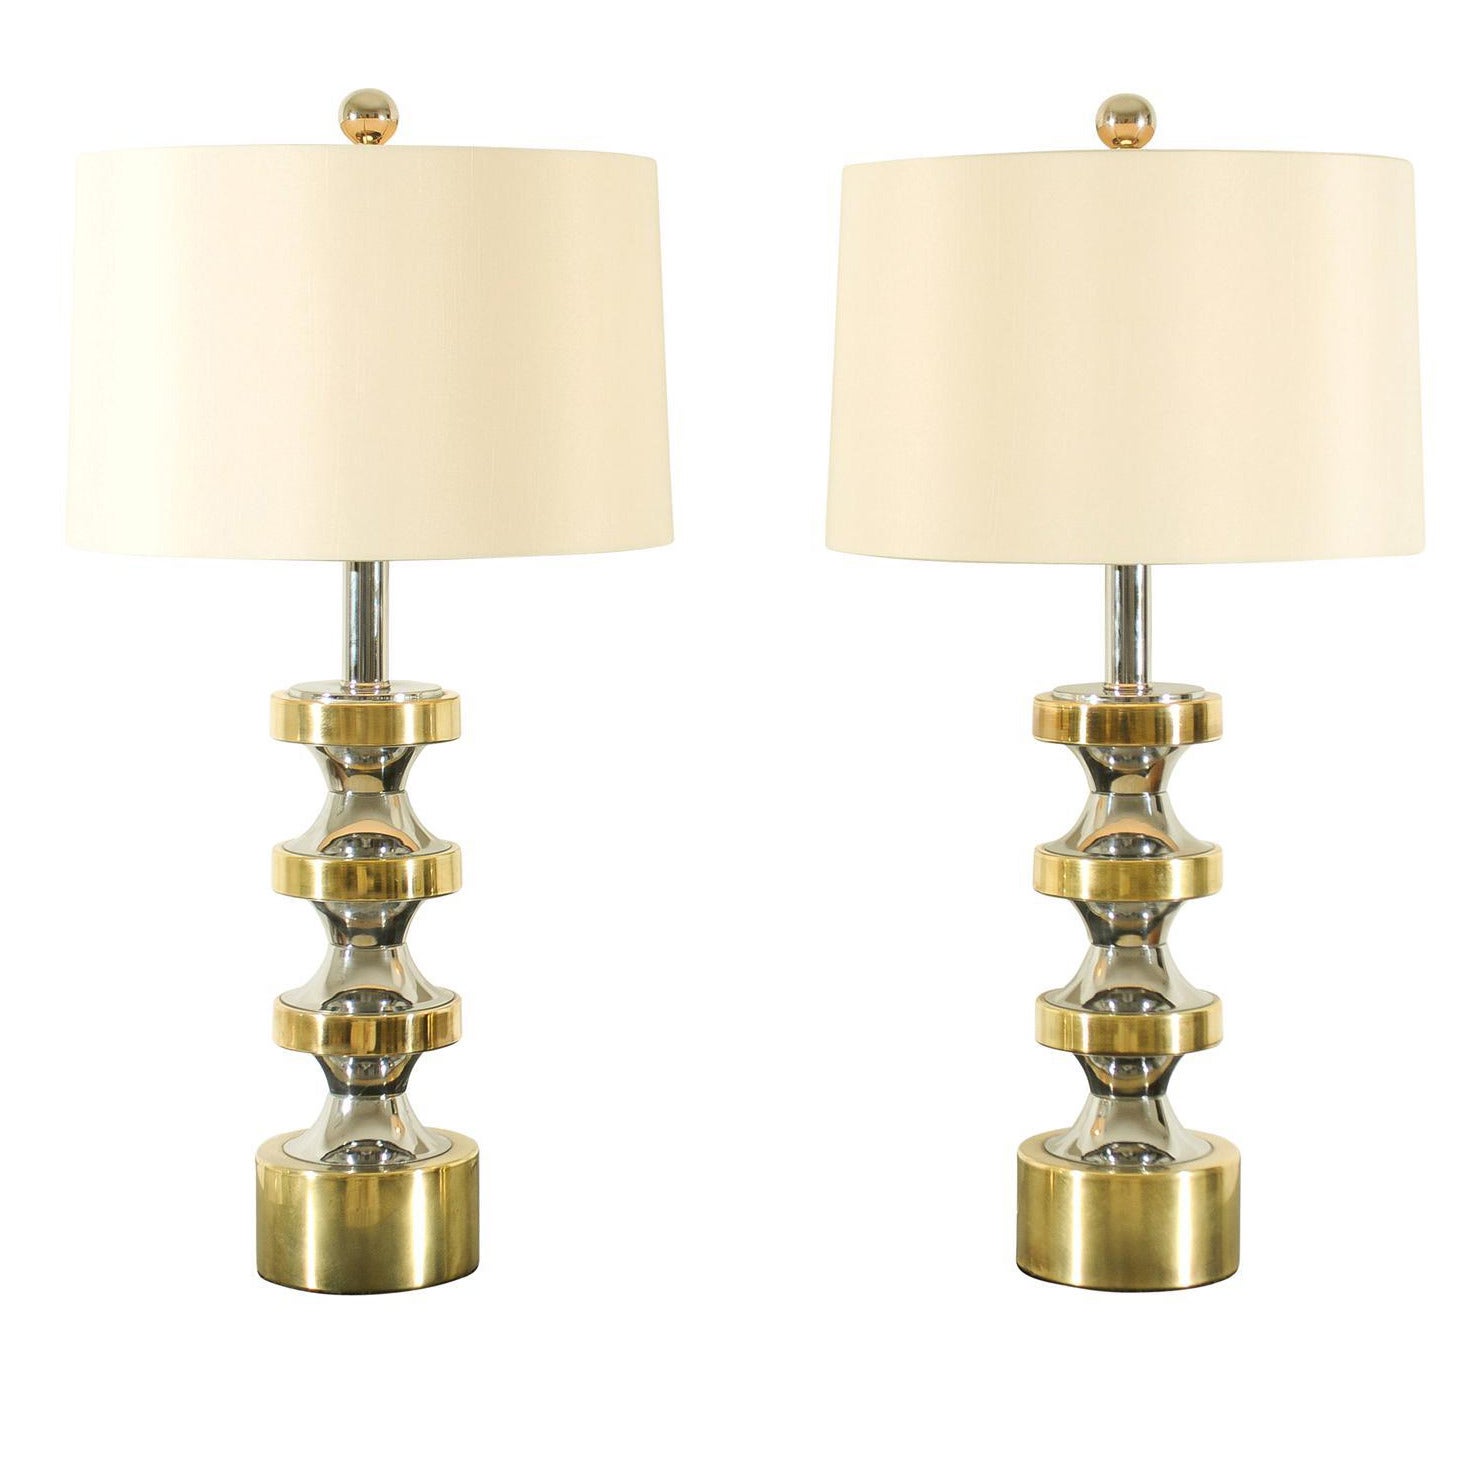 Pair of Vintage Sculptural Chrome and Brass Lamps